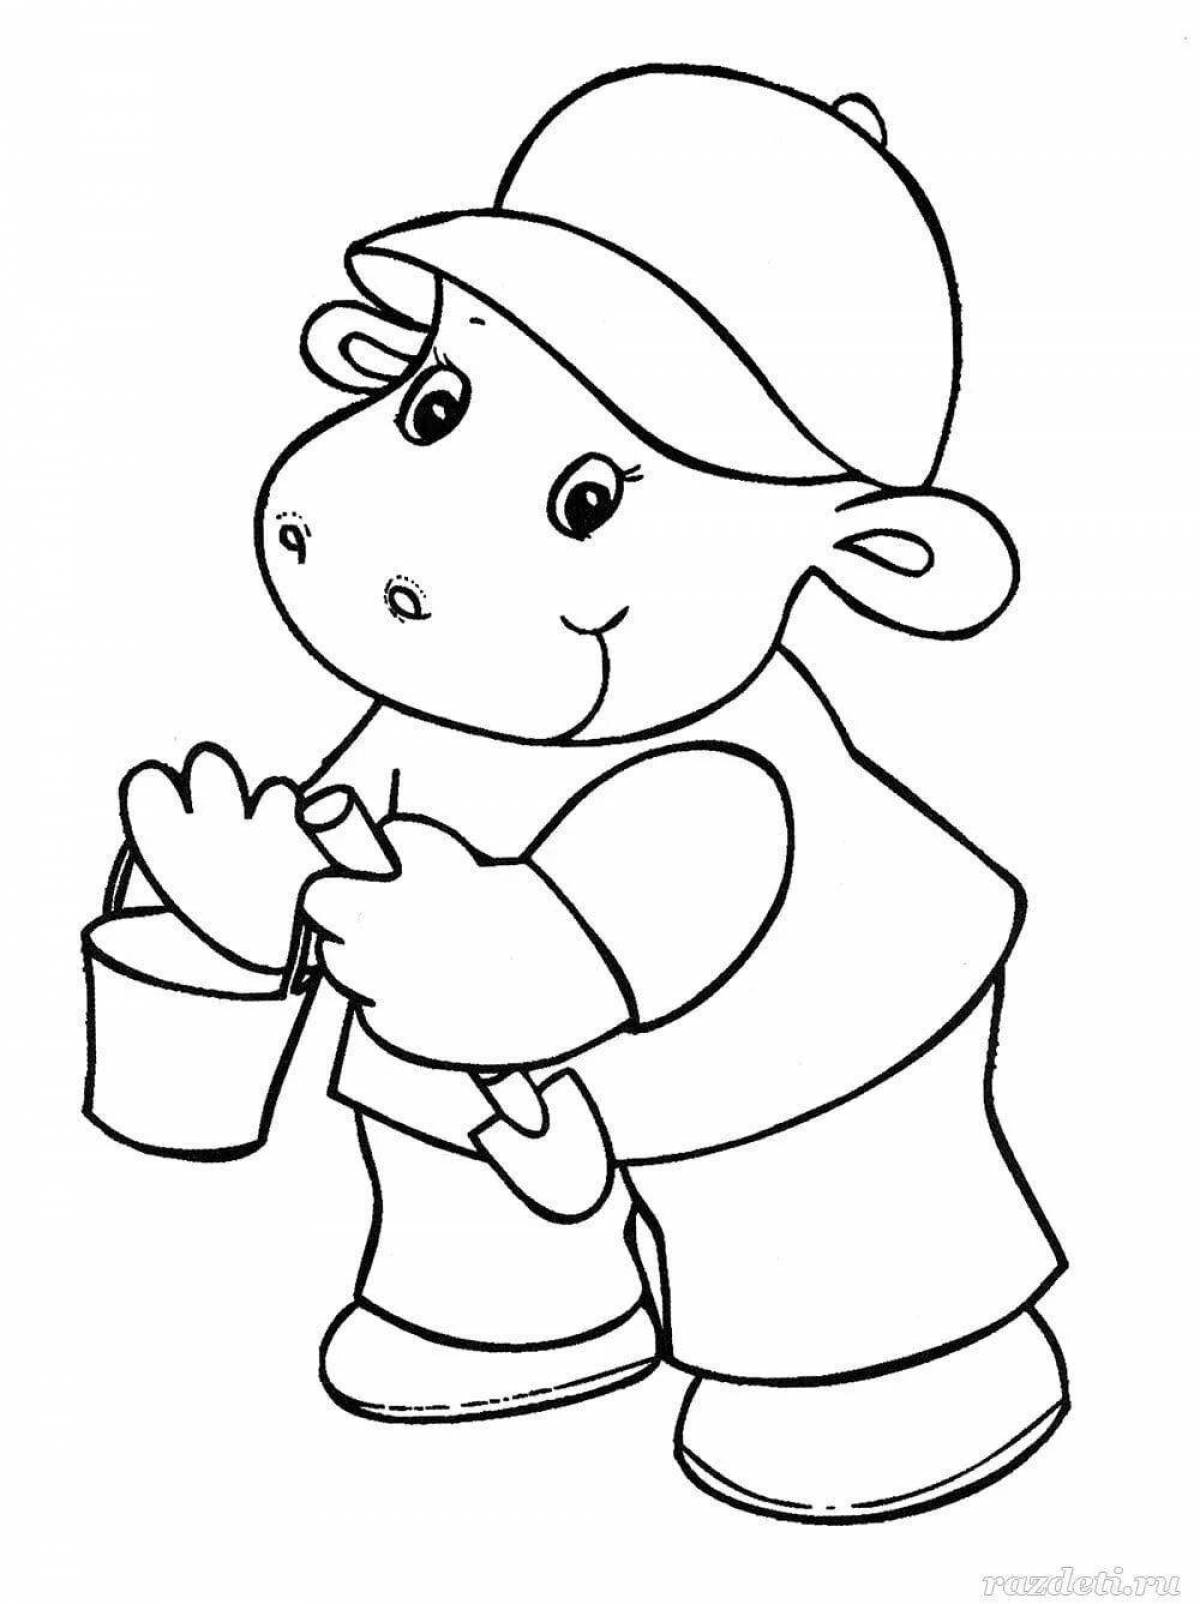 Exciting coloring book for preschoolers 4-5 years old